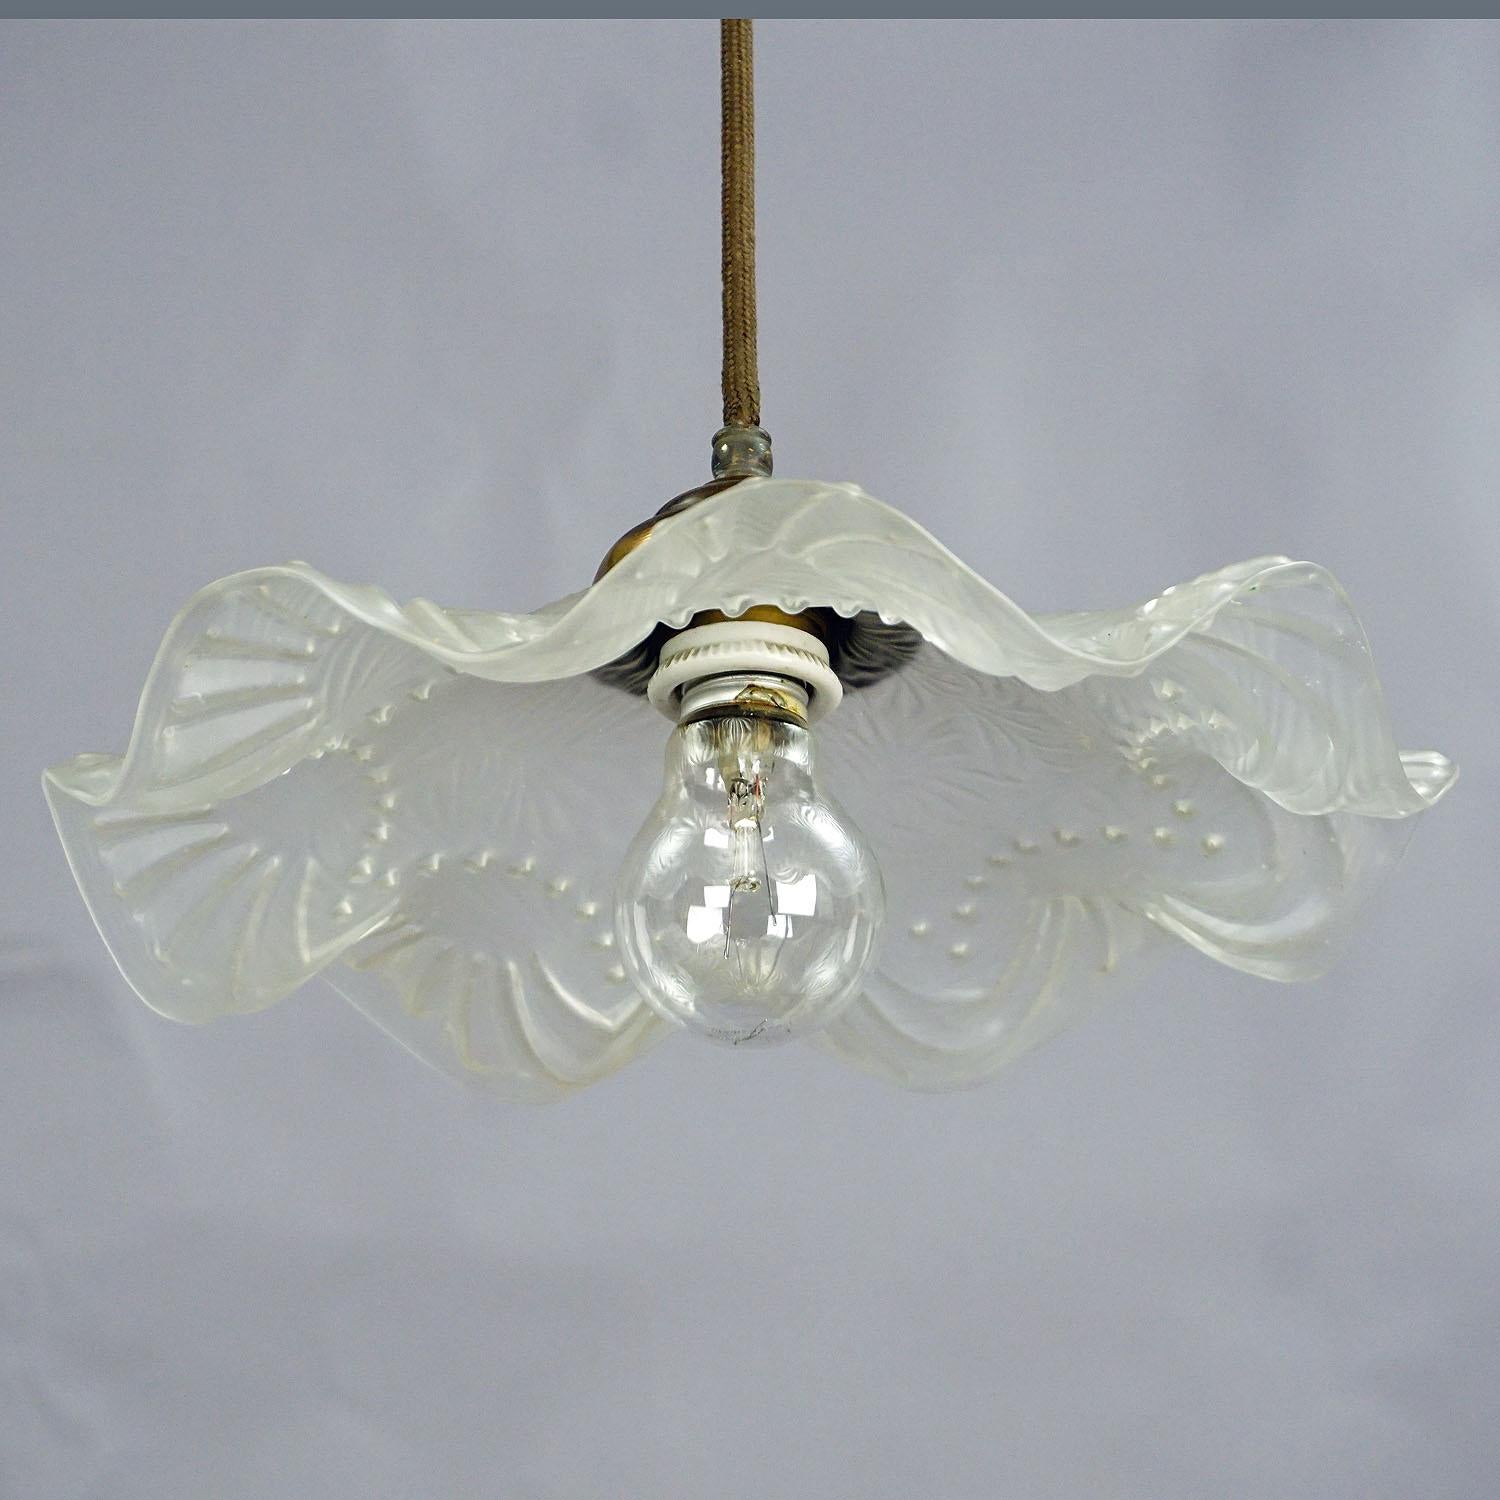 20th Century Antique Pendant Light with Clear Satinated Glass Shade, circa 1910